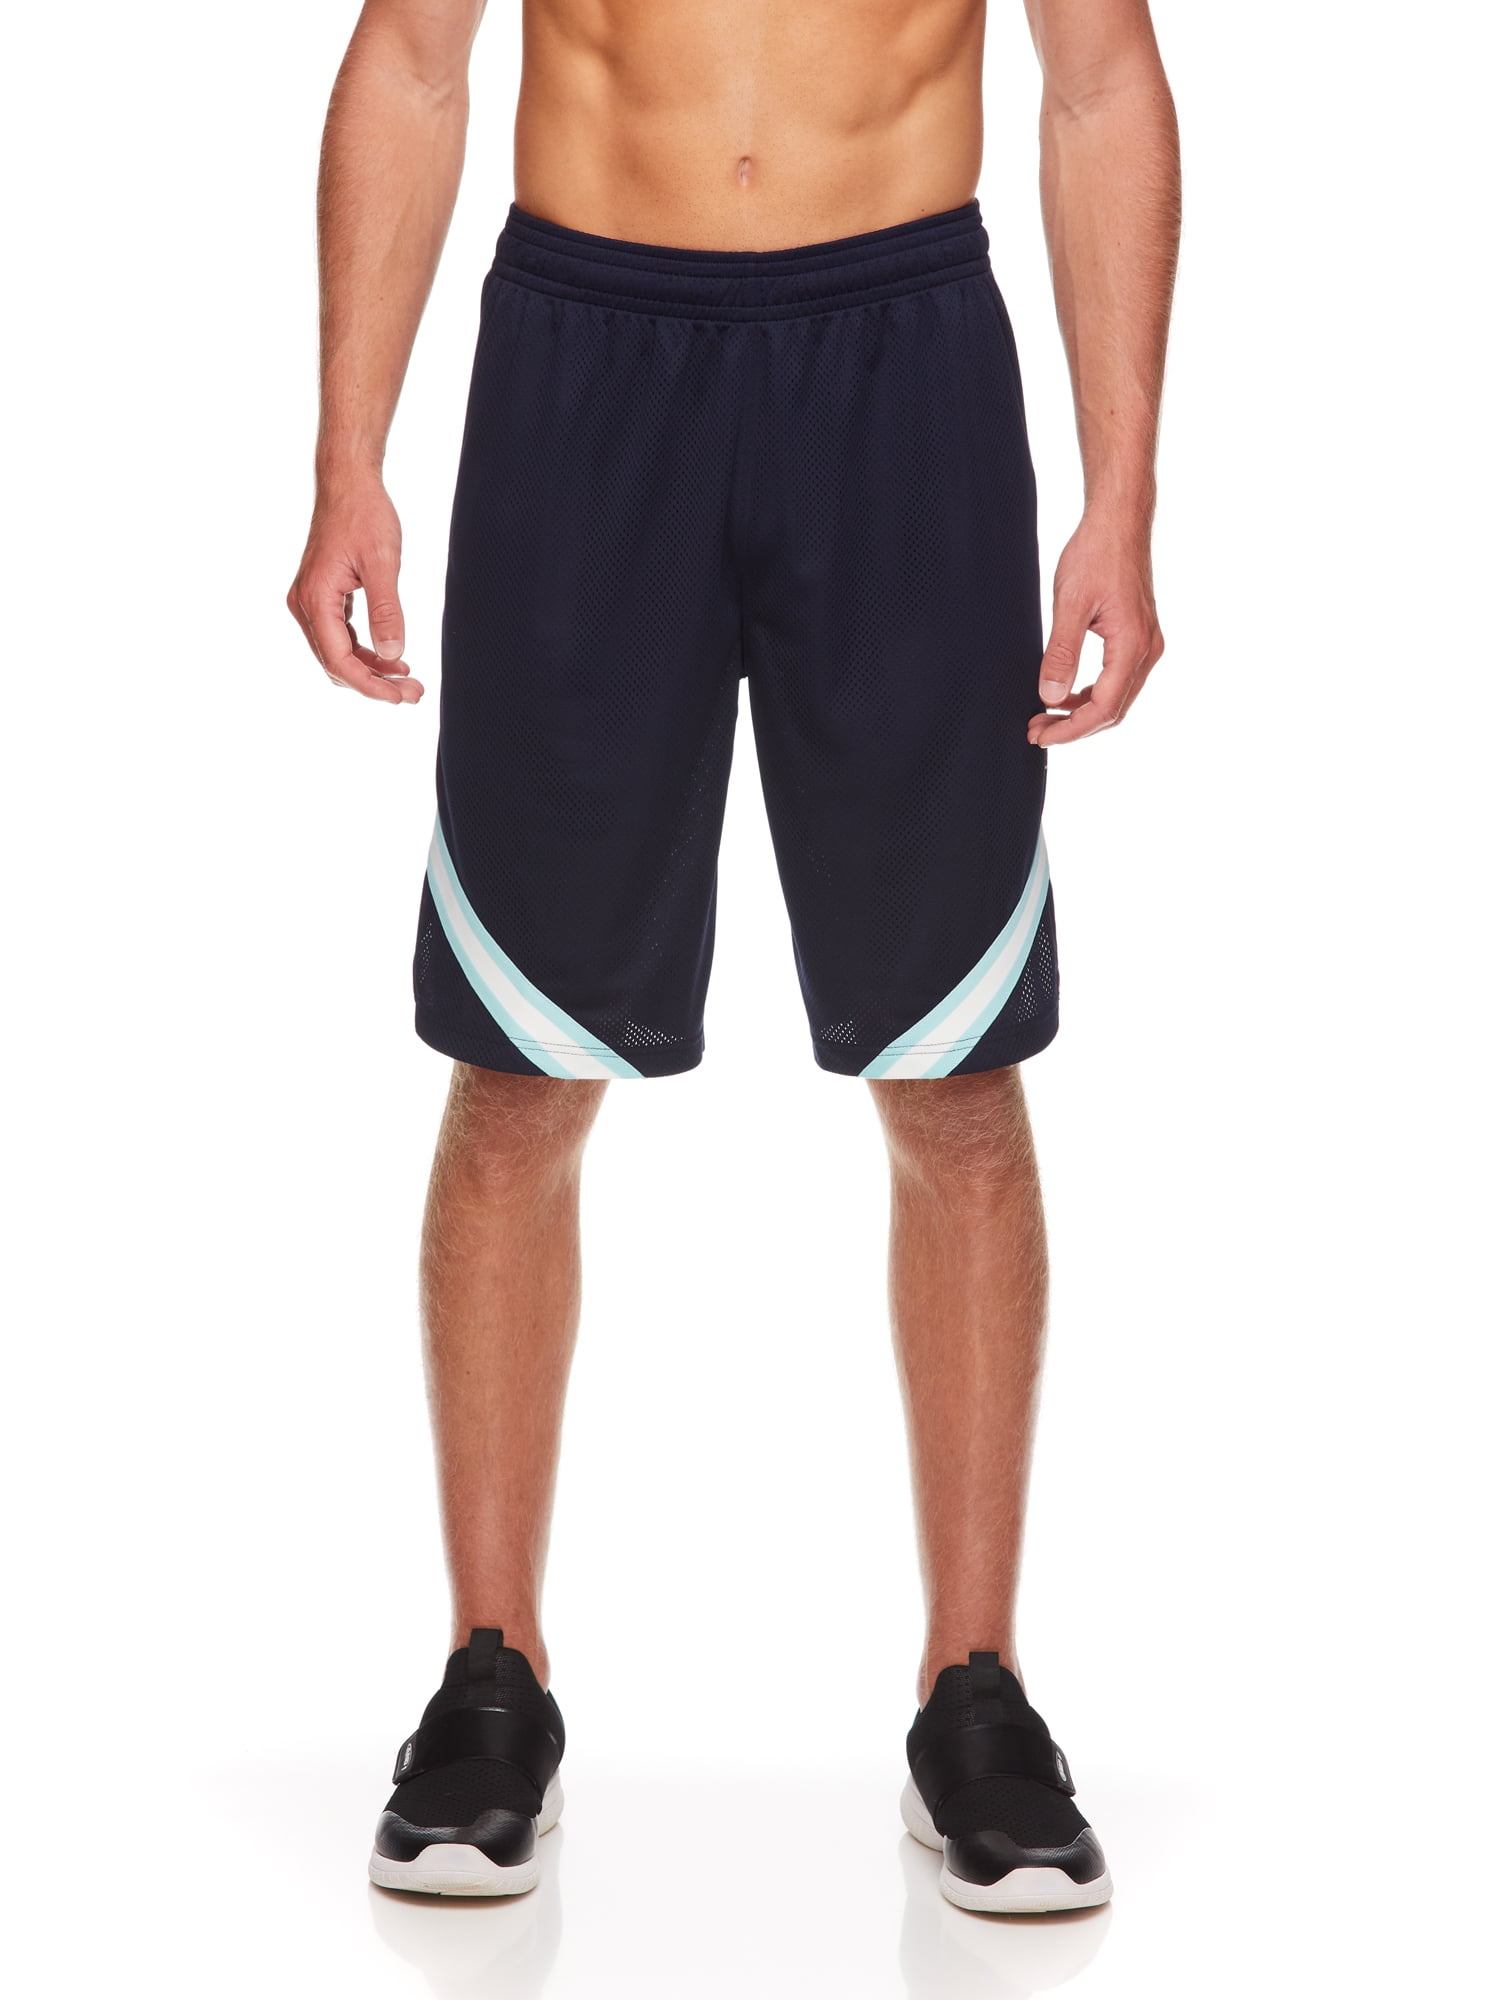 Details about   *** New Mens Basketball Shorts by And1.**Adjustable Elastic Waist Size S.***